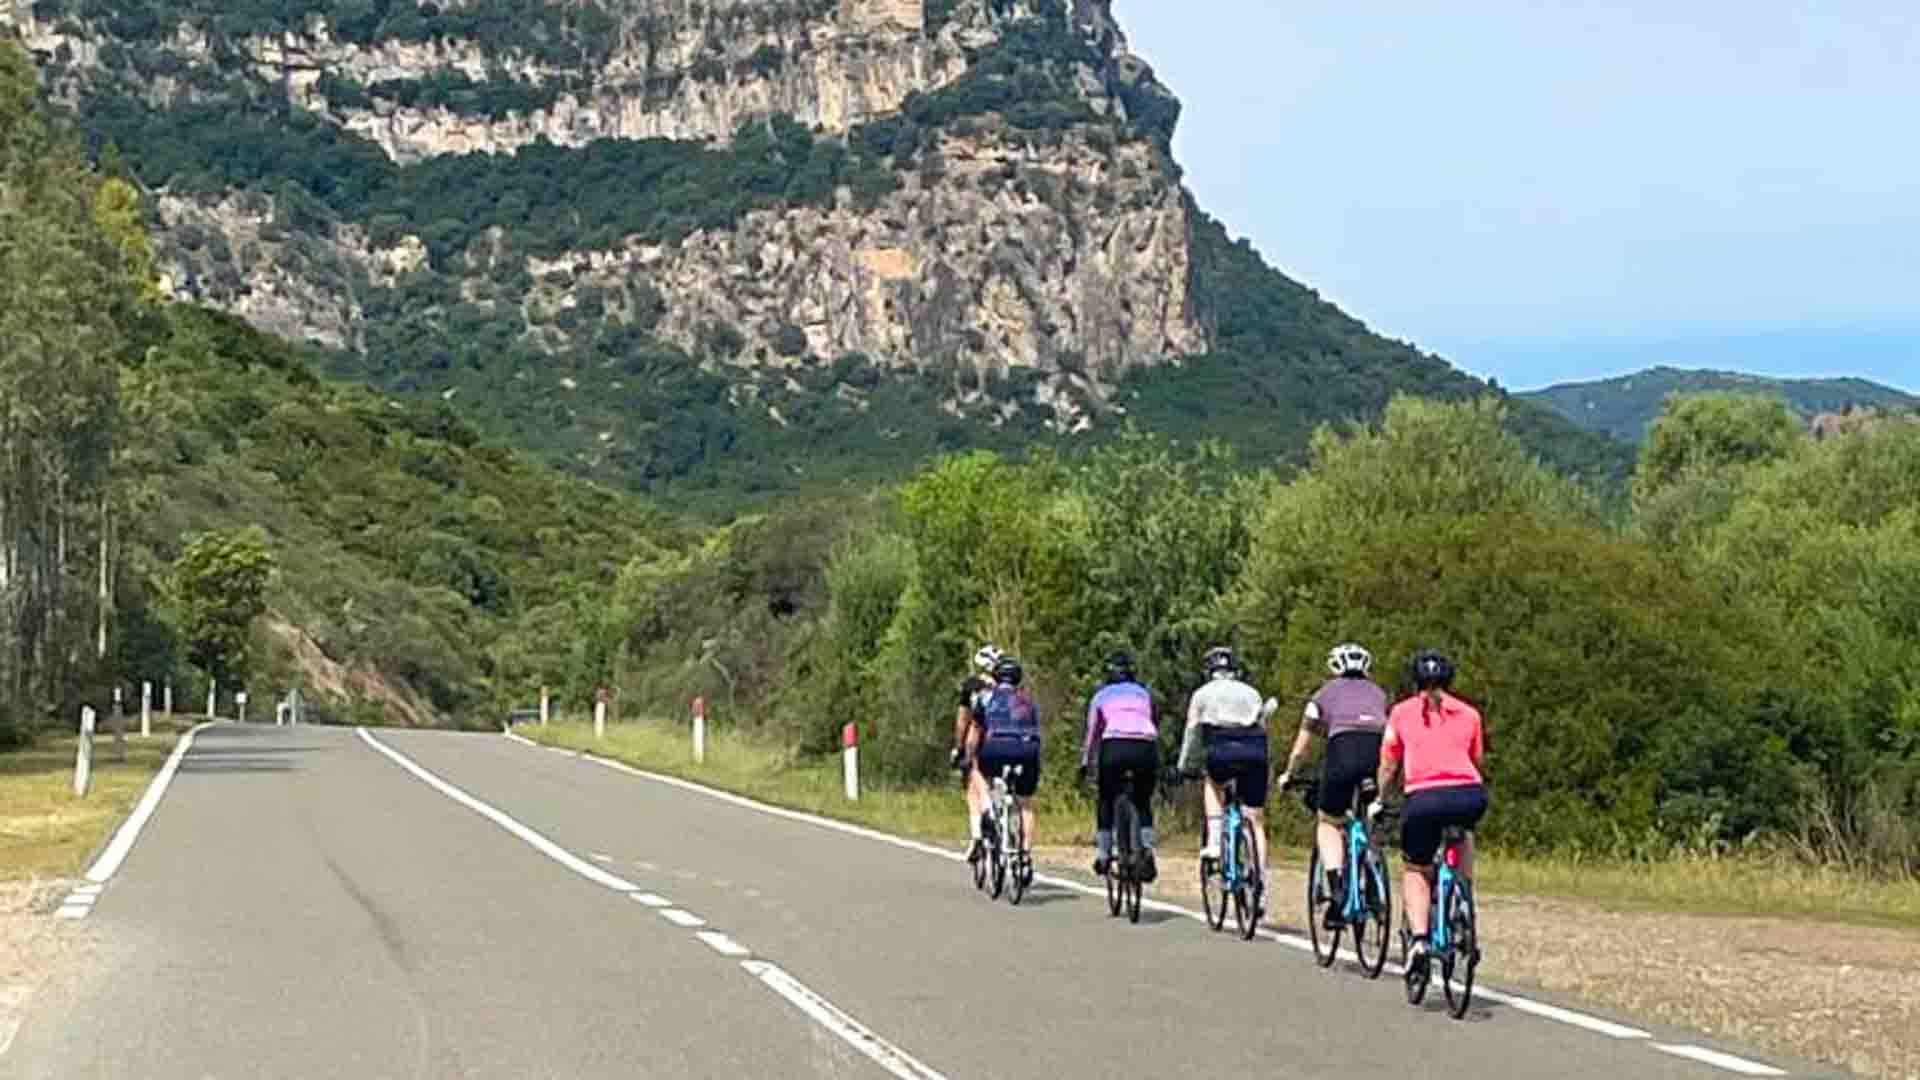 Group of women cycling with big mountain in distance